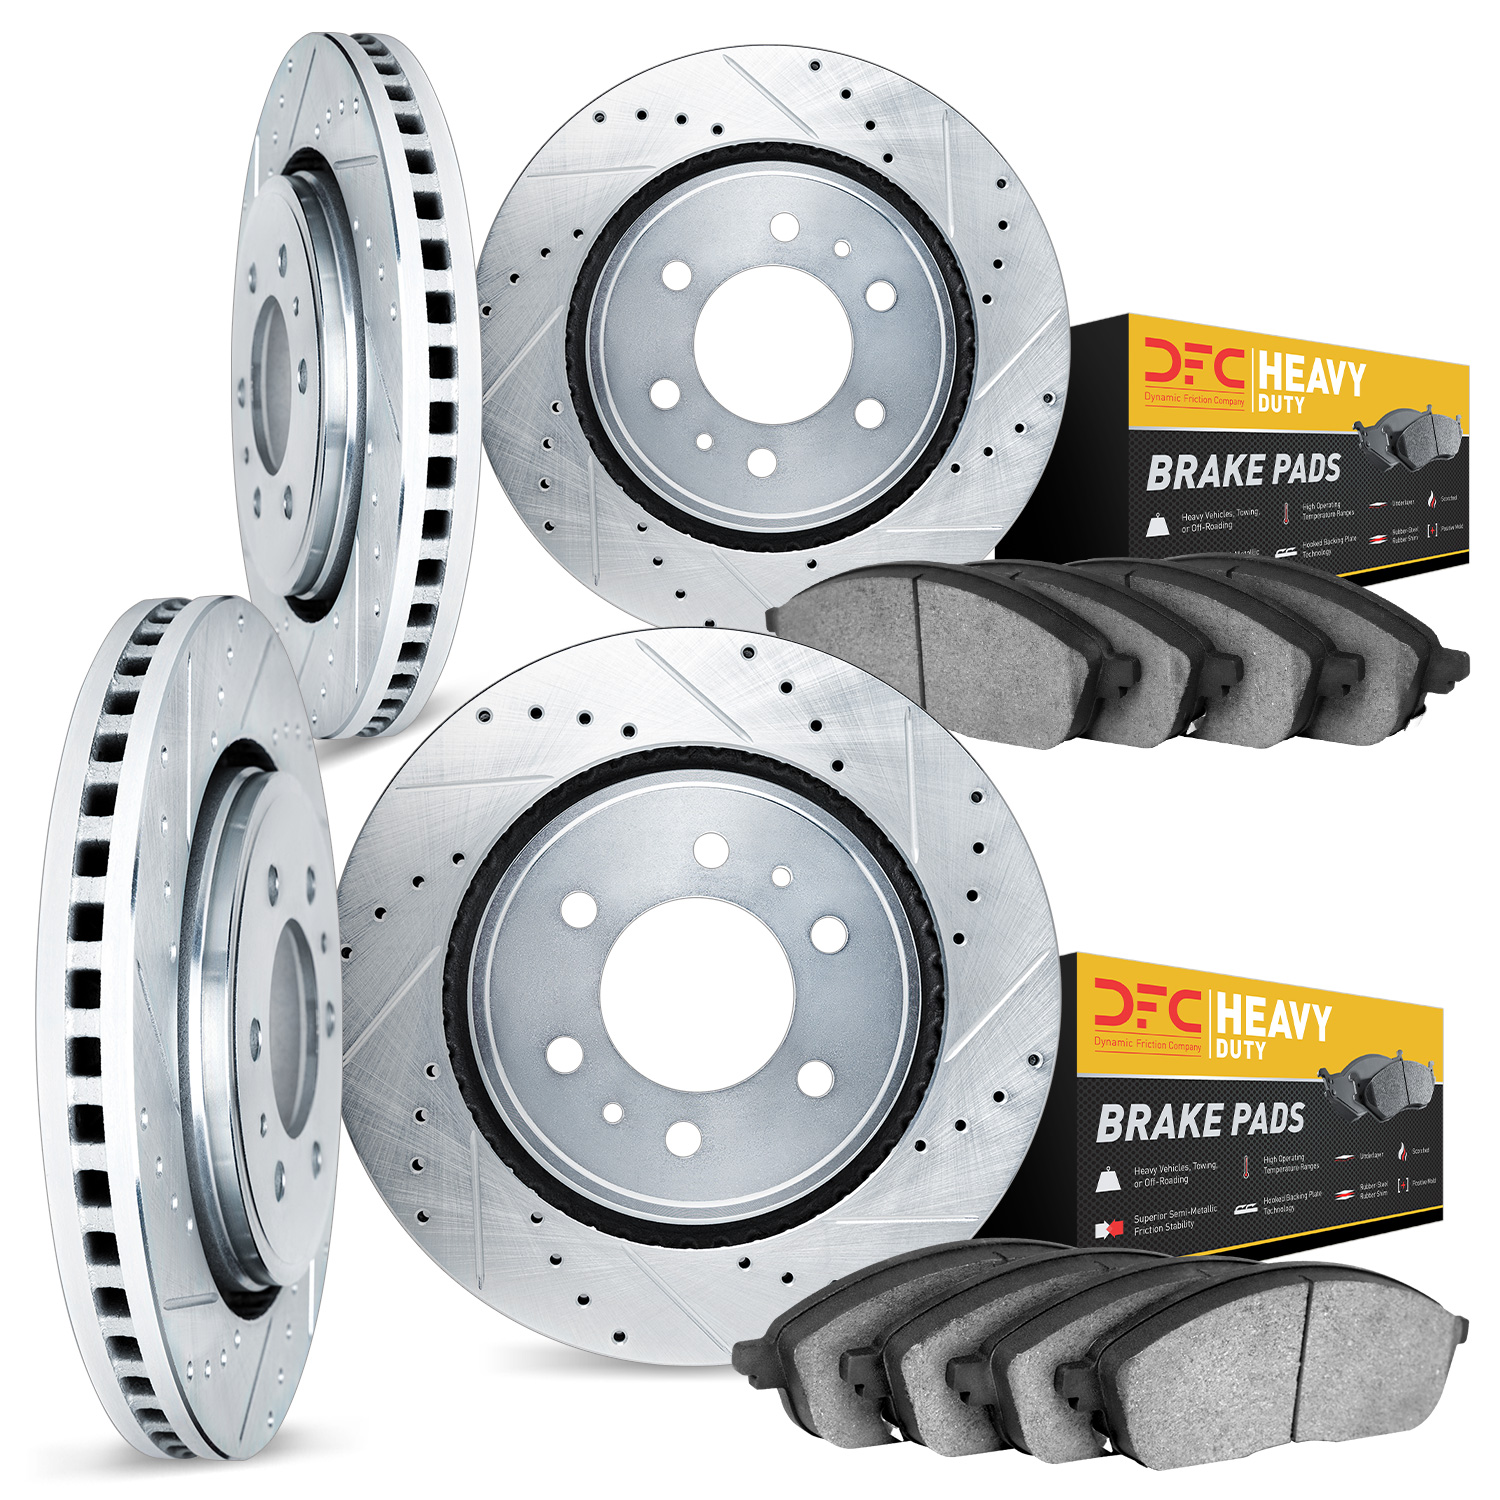 7204-40215 Drilled/Slotted Rotors w/Heavy-Duty Brake Pads Kit [Silver], Fits Select Multiple Makes/Models, Position: Front and R